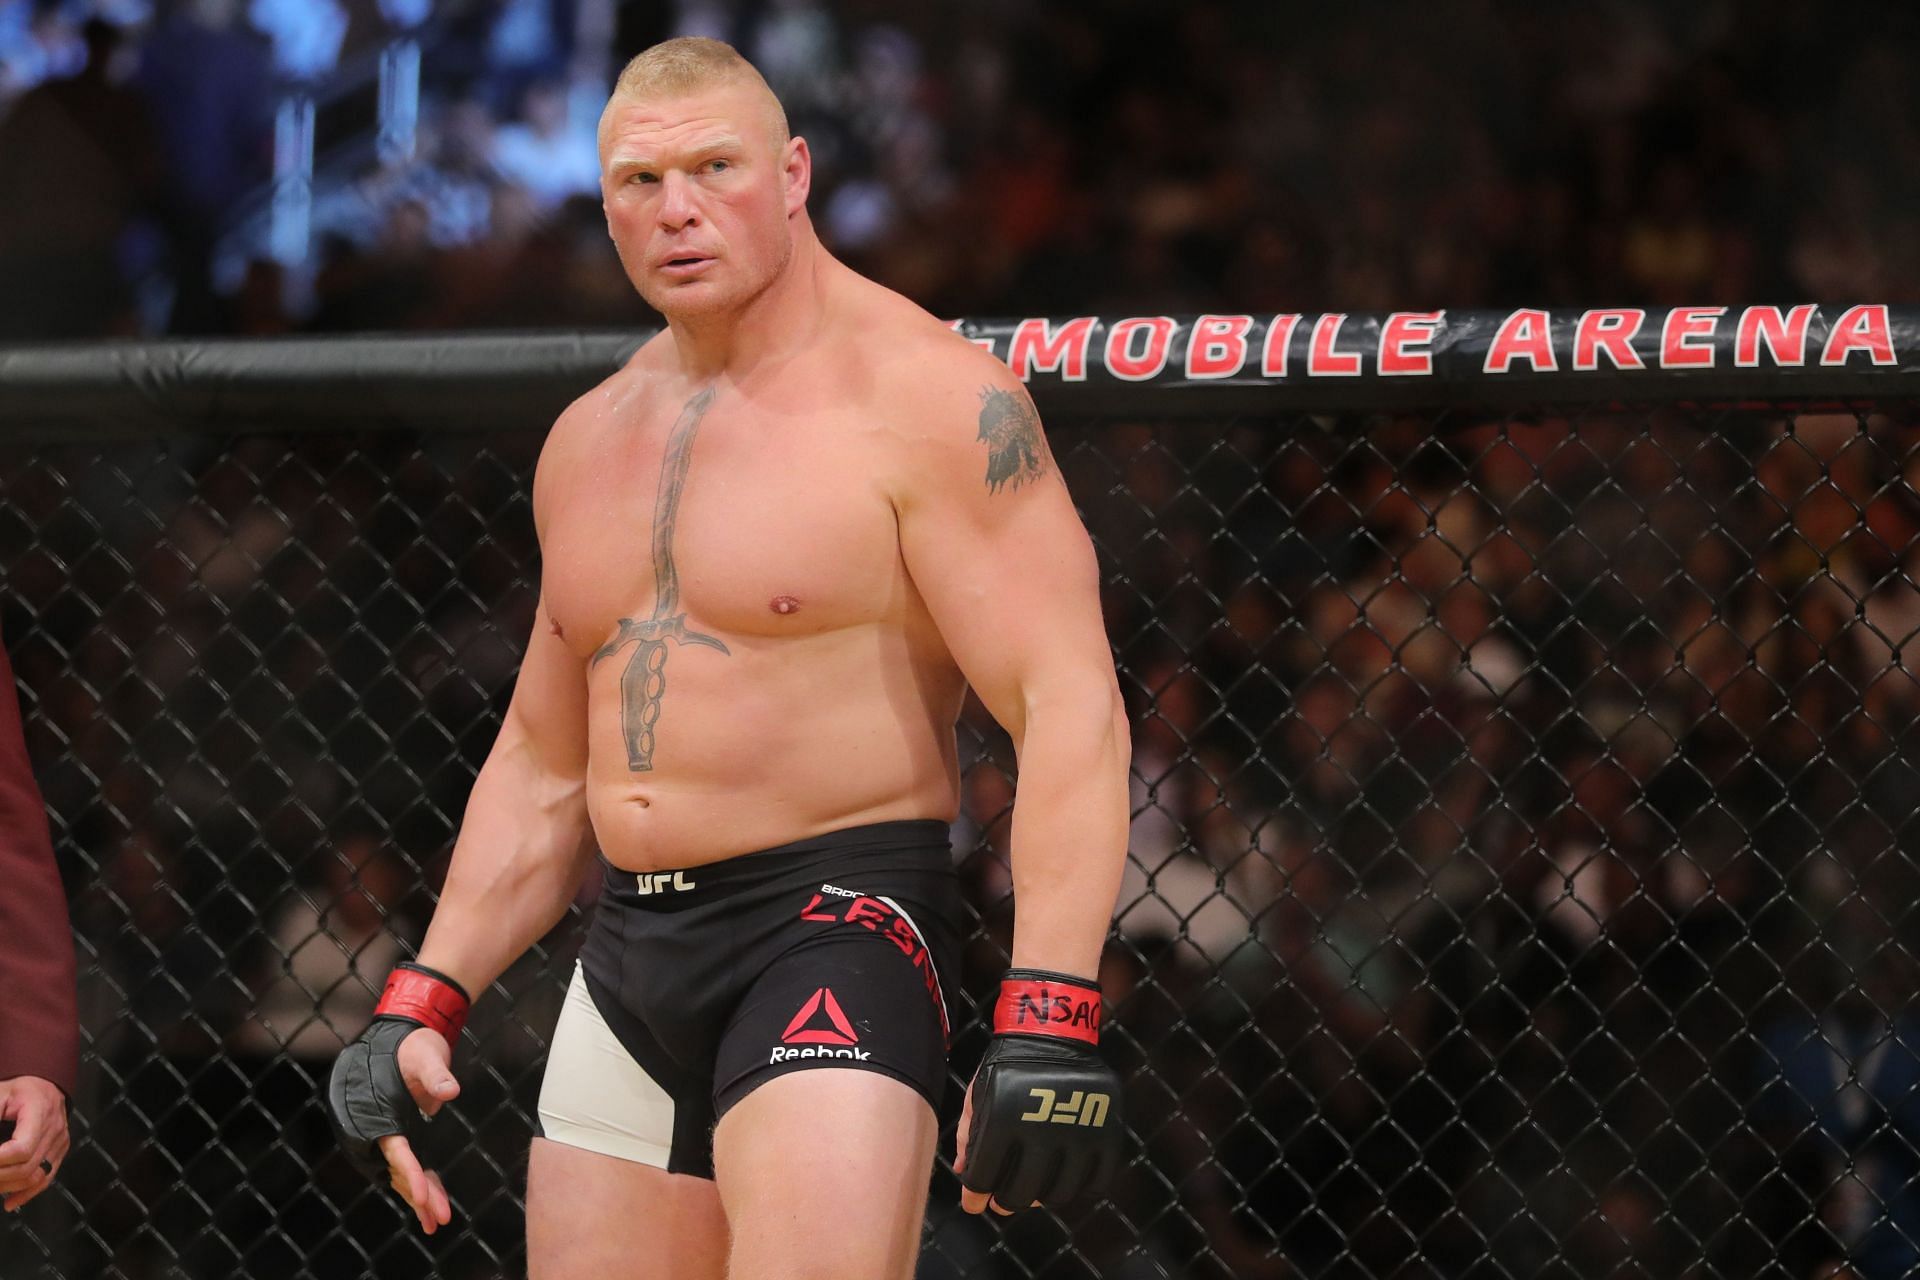 Brock Lesnar was a huge success in both the UFC and in WWE